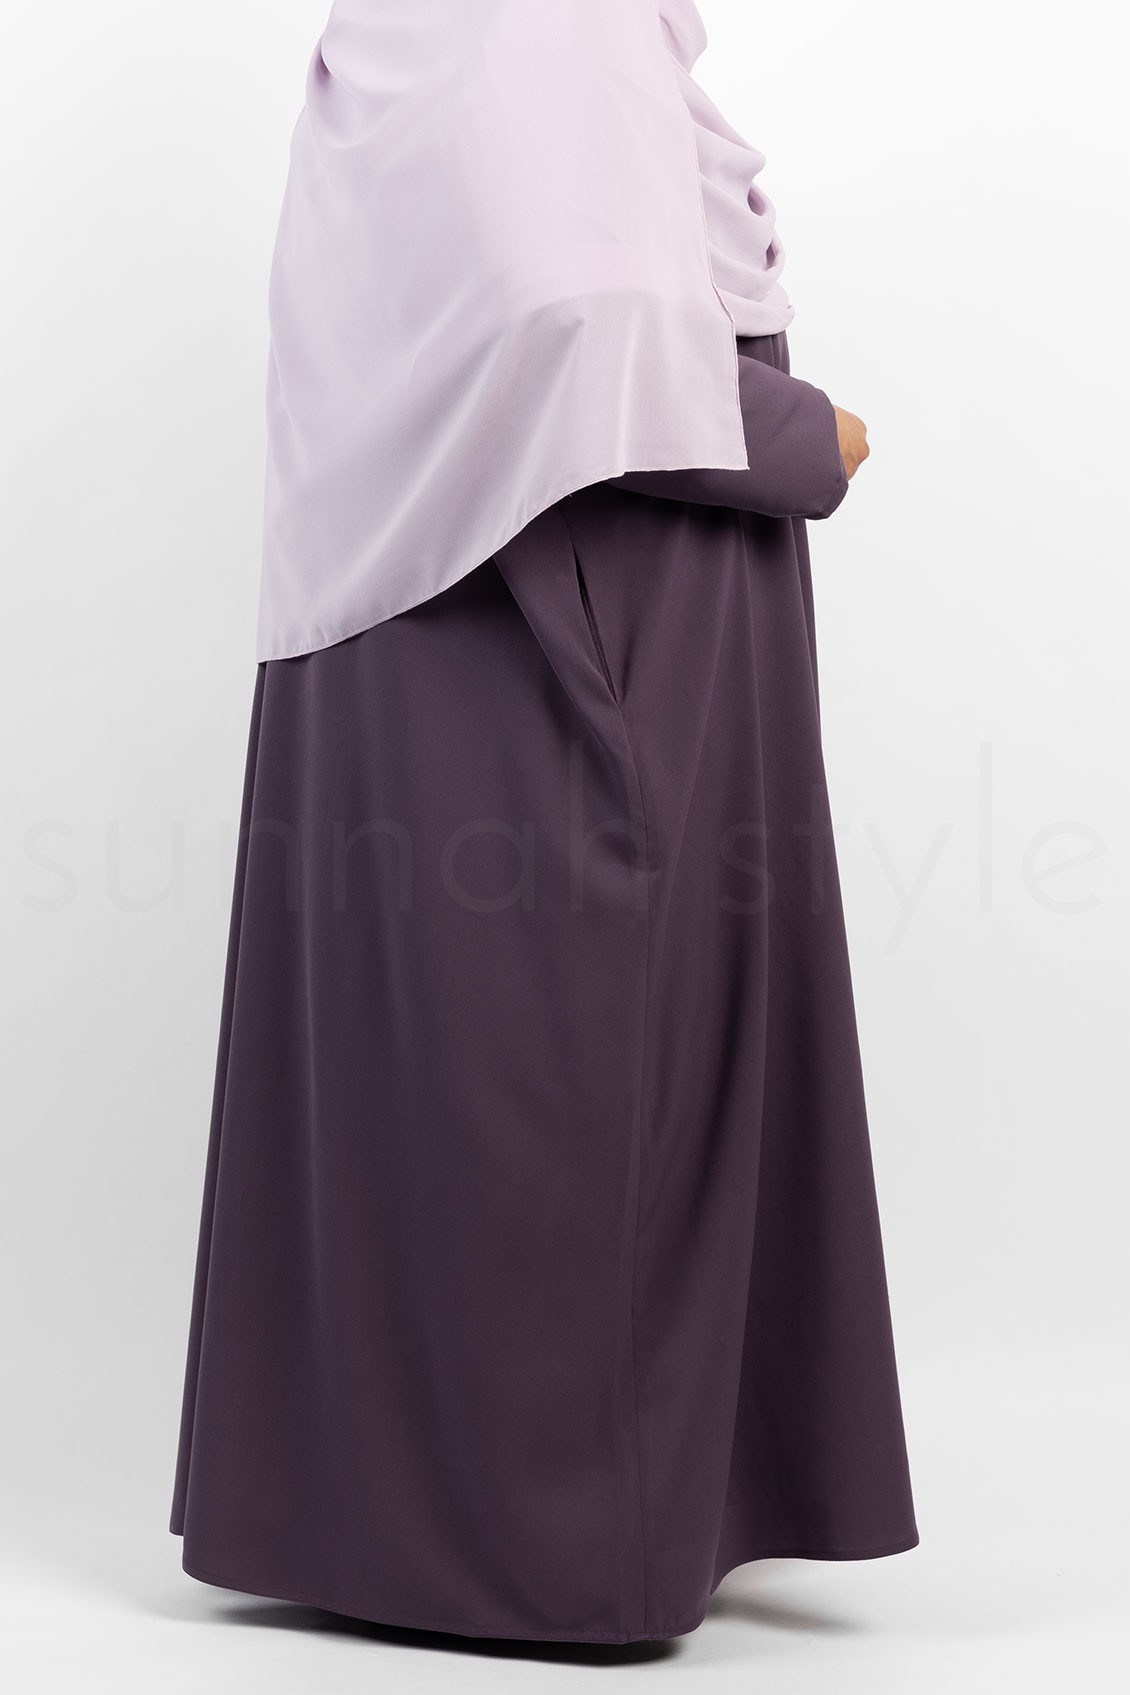 Sunnah Style Essentials Closed Abaya Plus Size Pockets Lilac